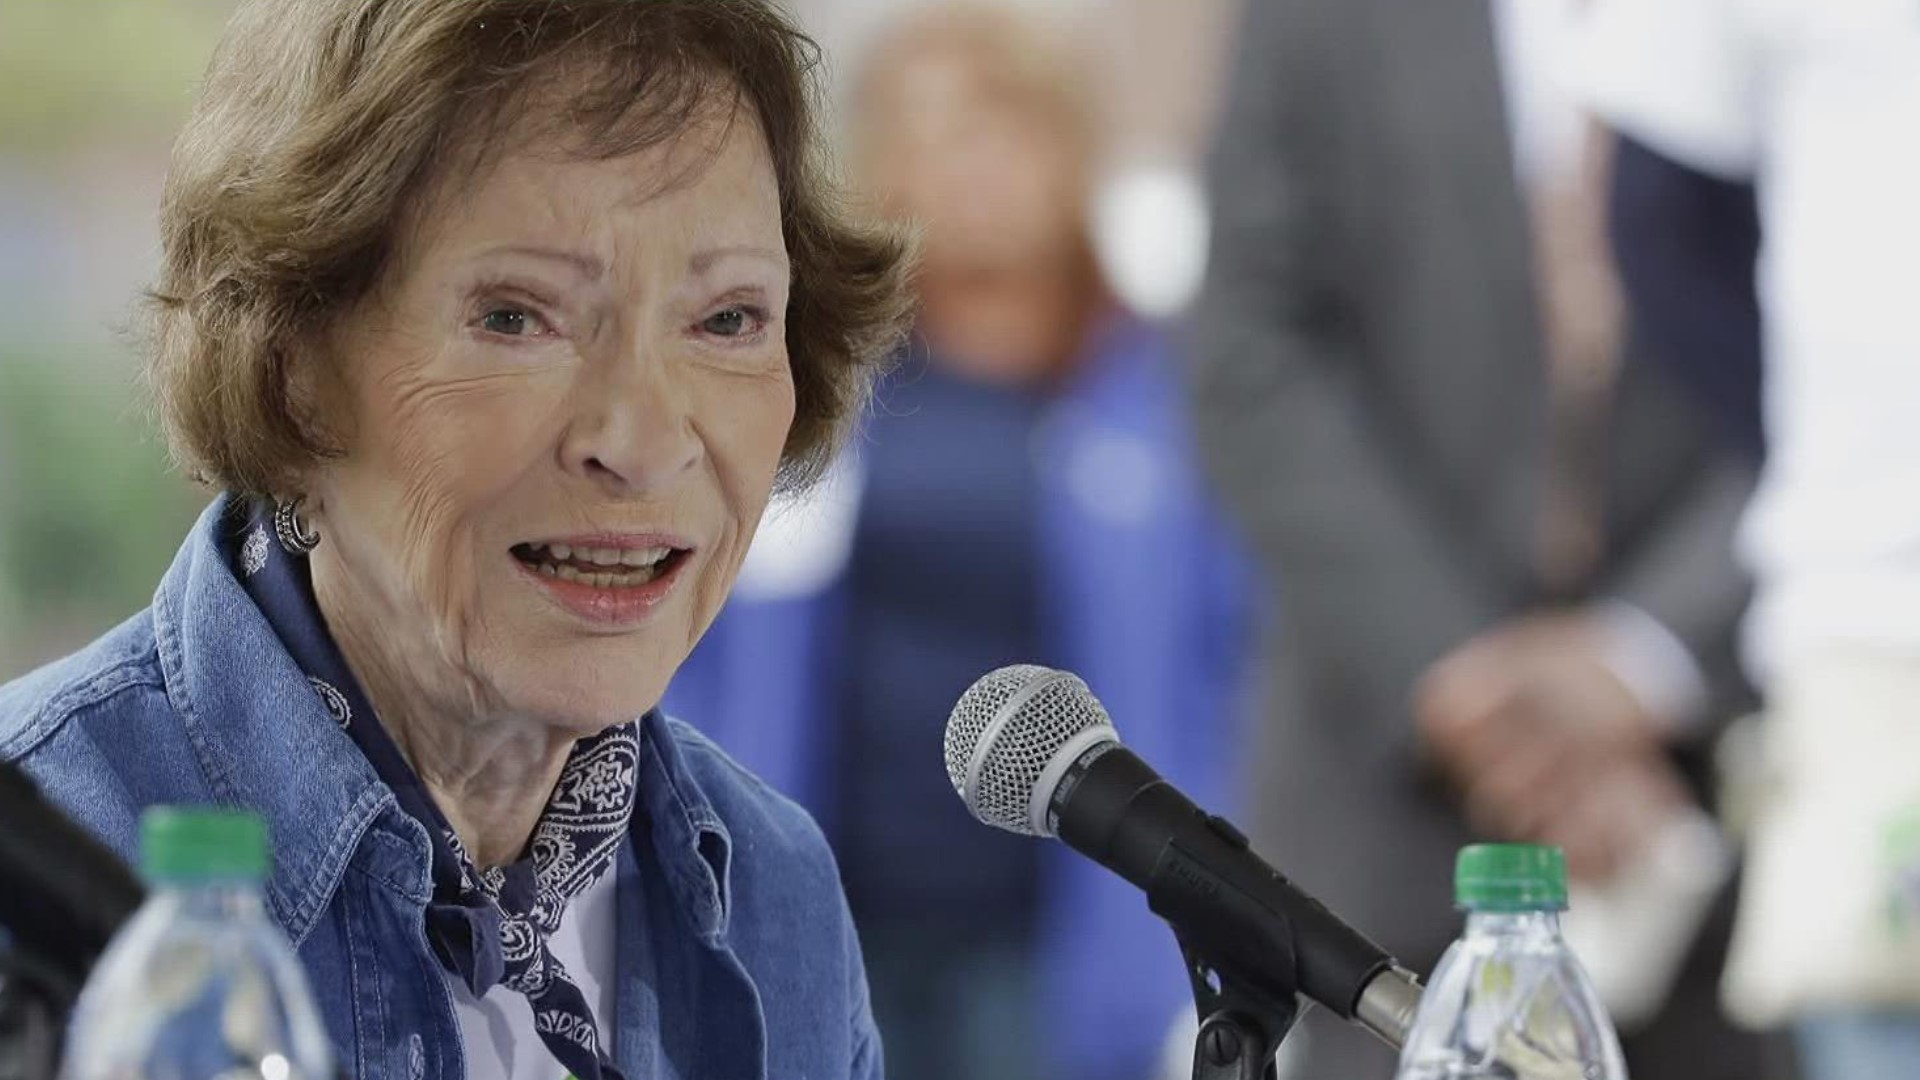 Rosalynn Carter was diagnosed with dementia in May. She is 96 years old.